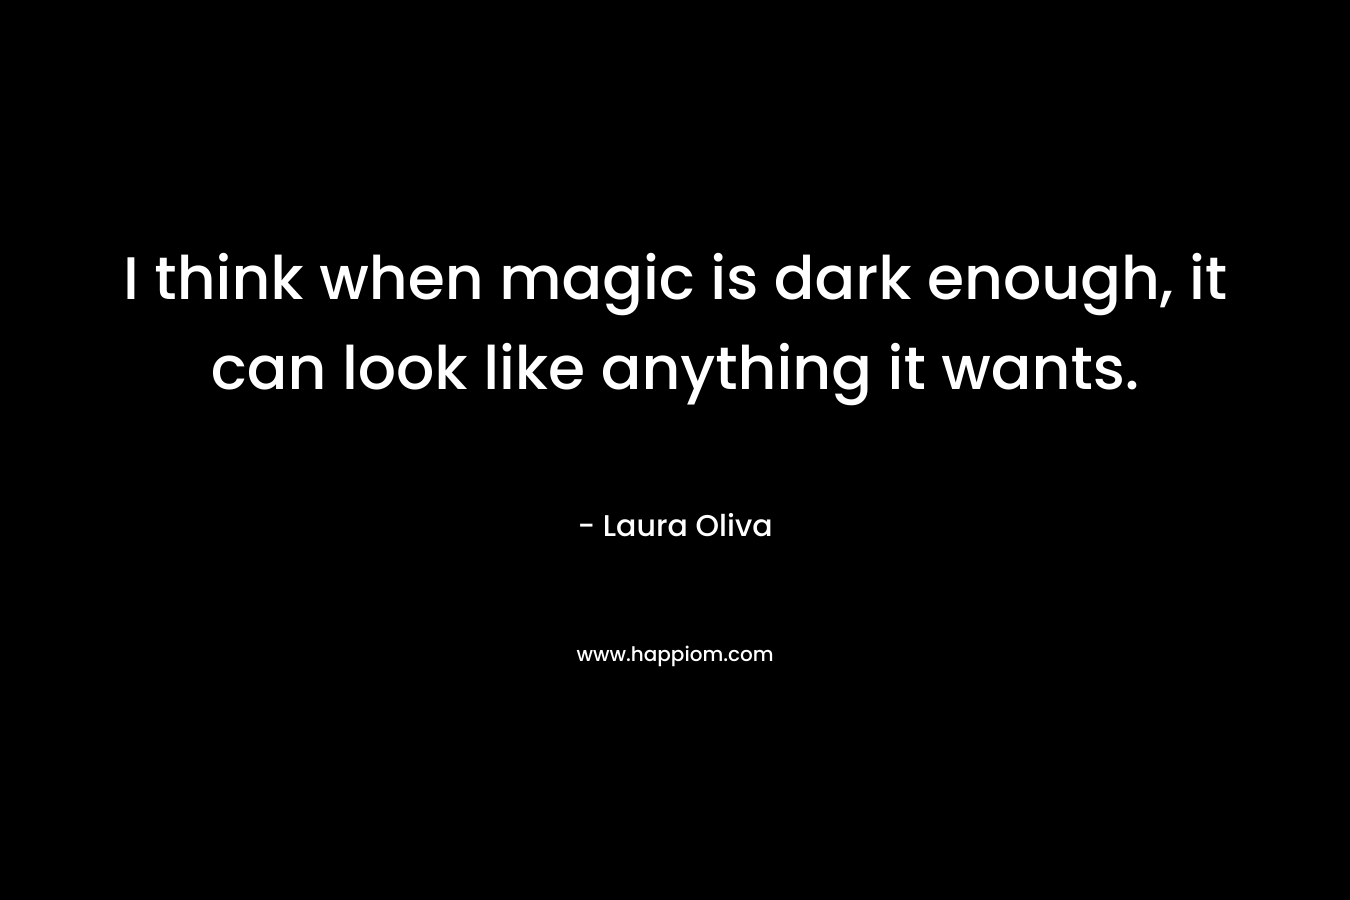 I think when magic is dark enough, it can look like anything it wants.